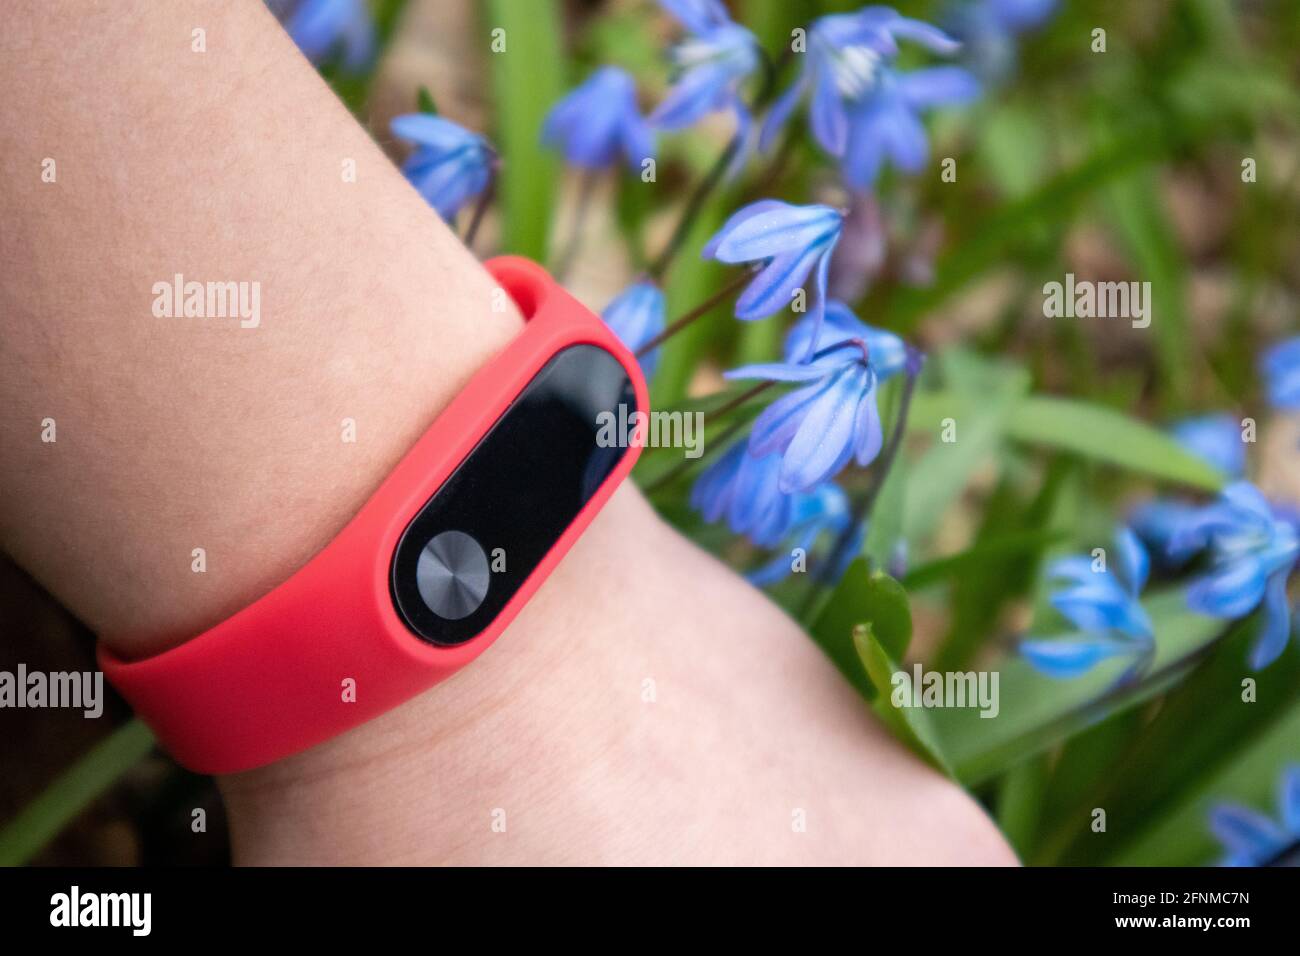 Fitness Tracker With Red Band On Wrist Close Up In Spring Blue Flowers Outdoor Activity